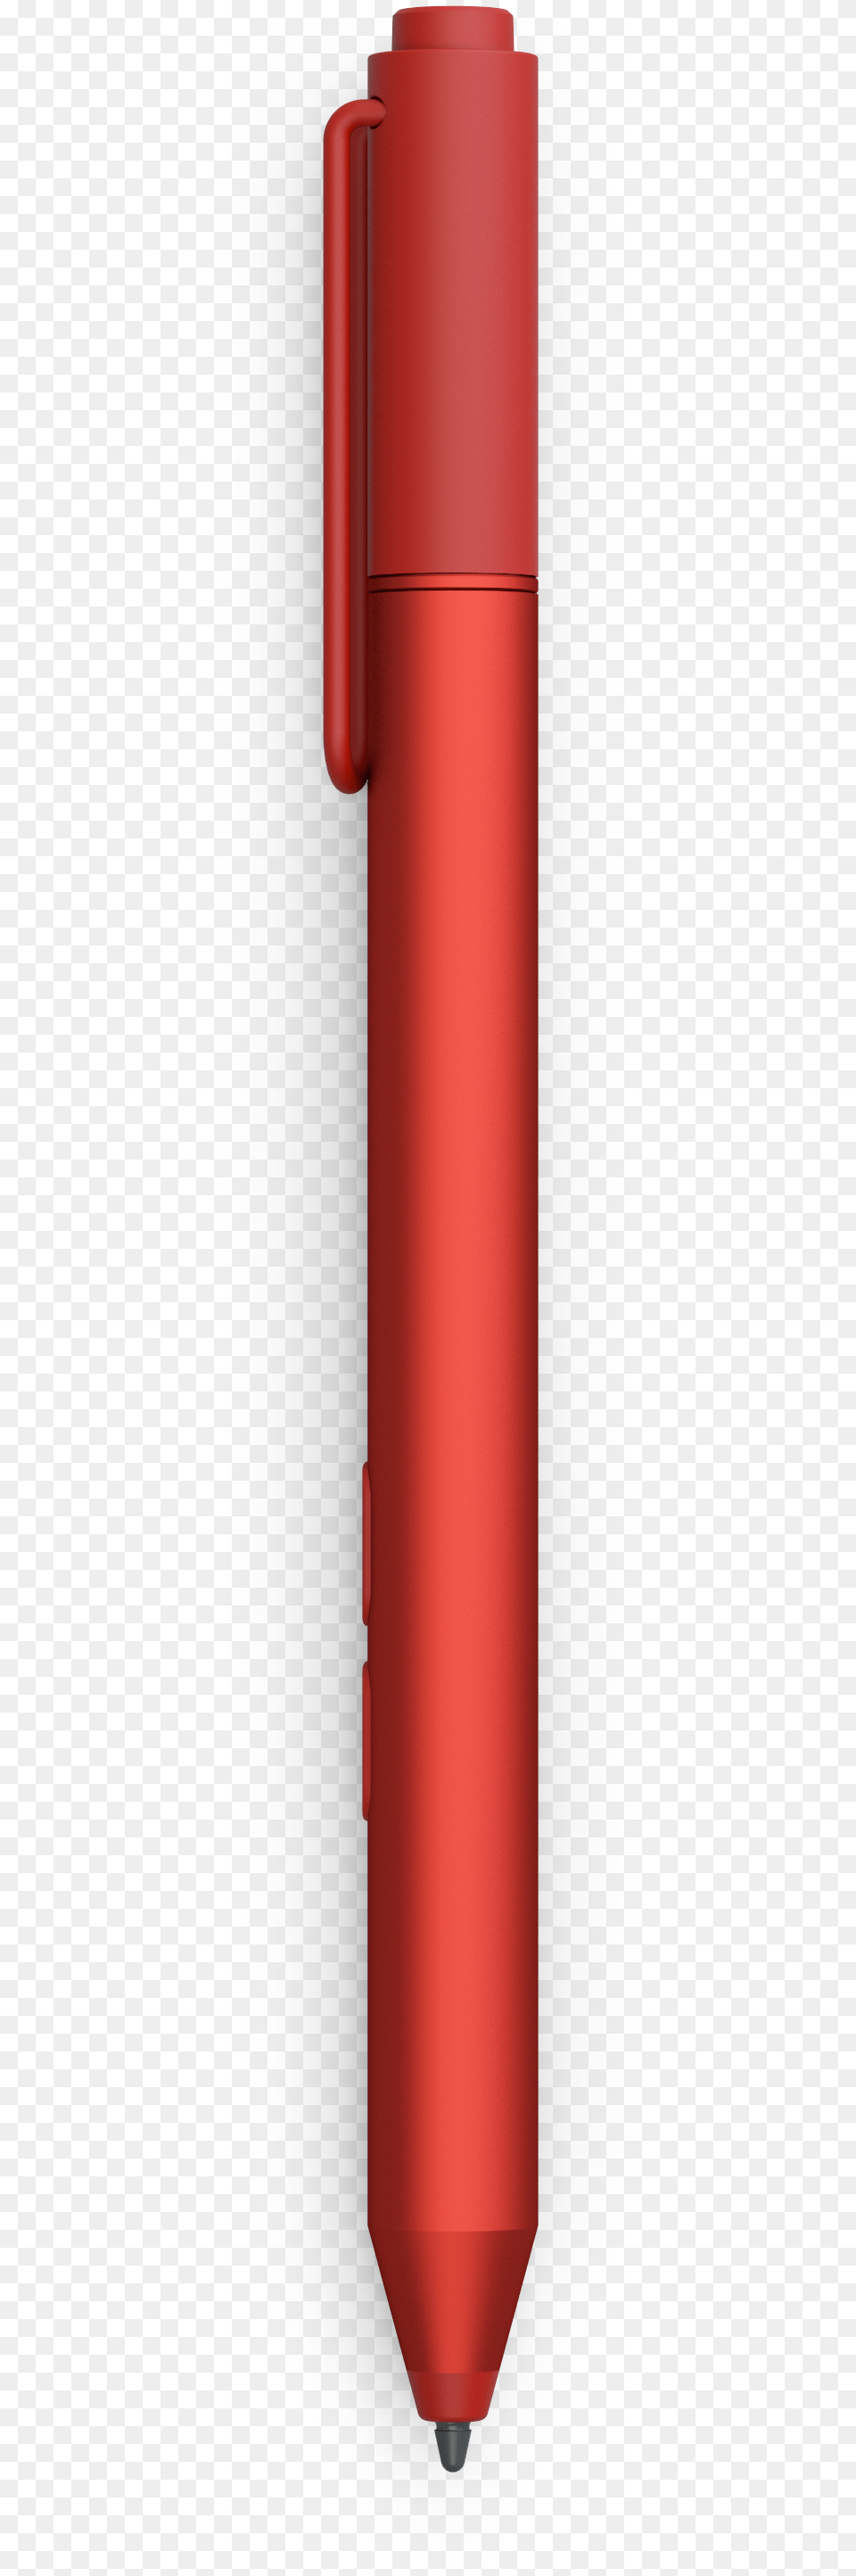 Surface Pen Red Free Transparent Png